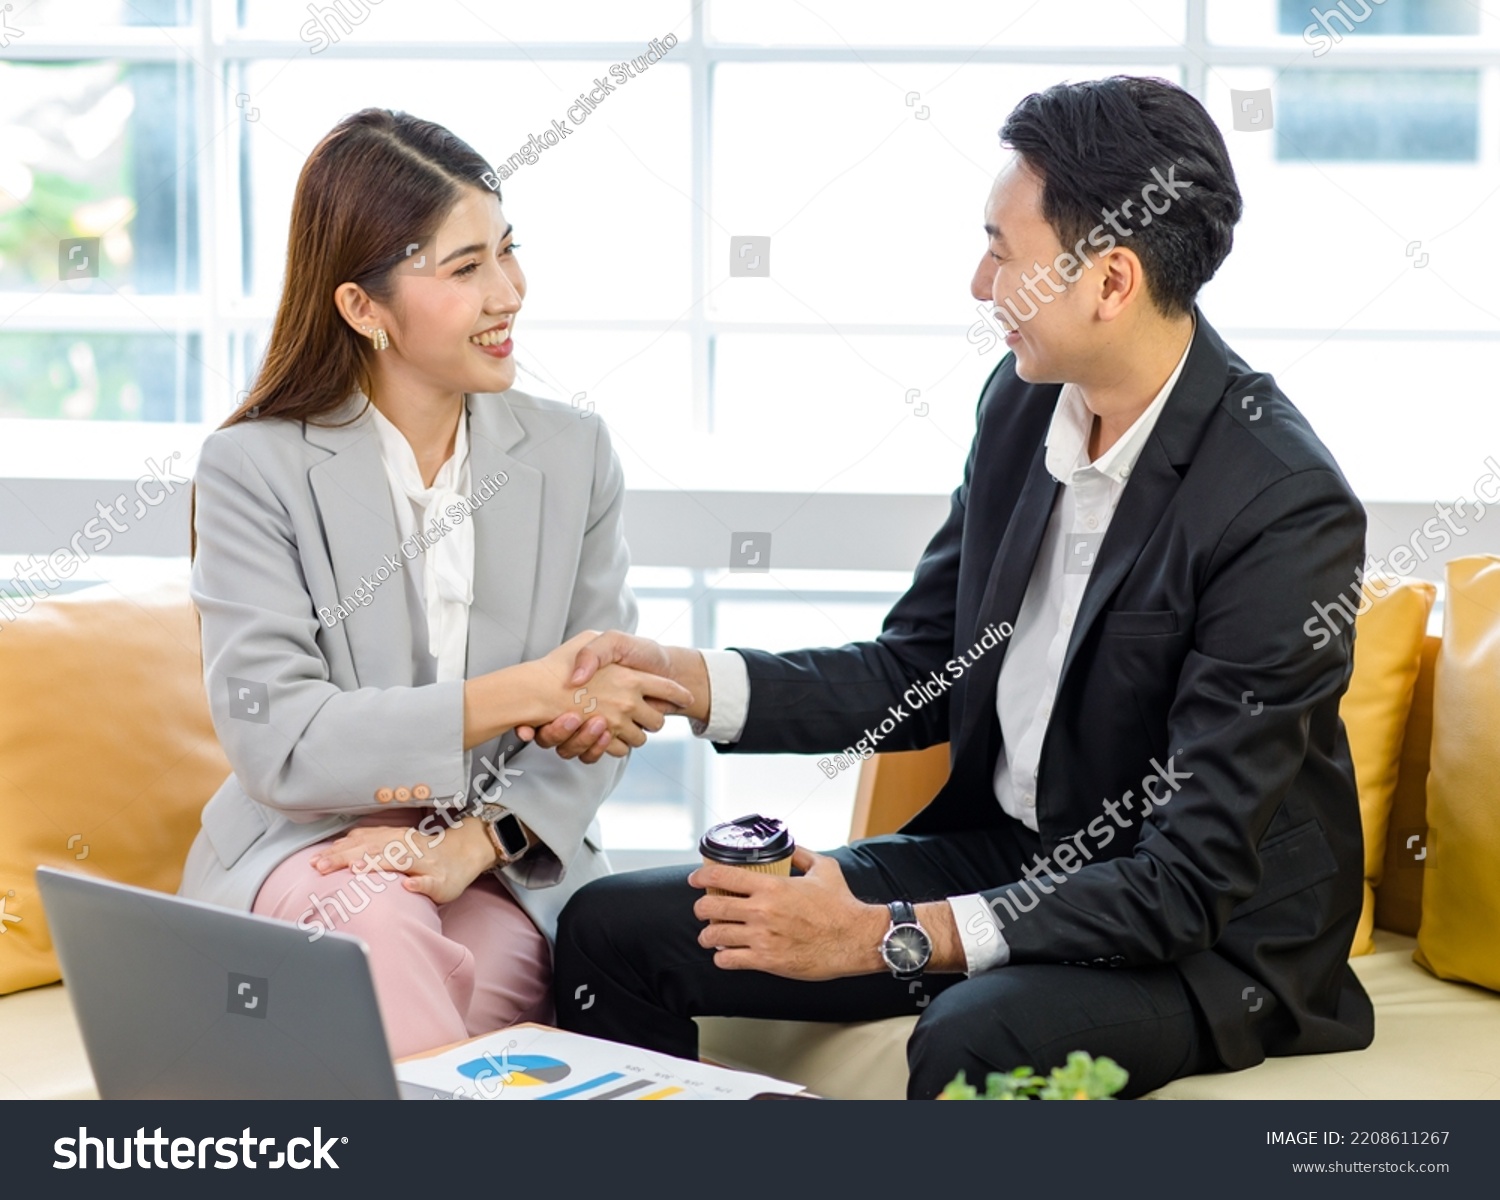 Millennial Asian professional successful businessman in formal suit sitting on sofa smiling holding disposable hot coffee cup shaking hands greeting with businesswoman customer in office meeting room. #2208611267